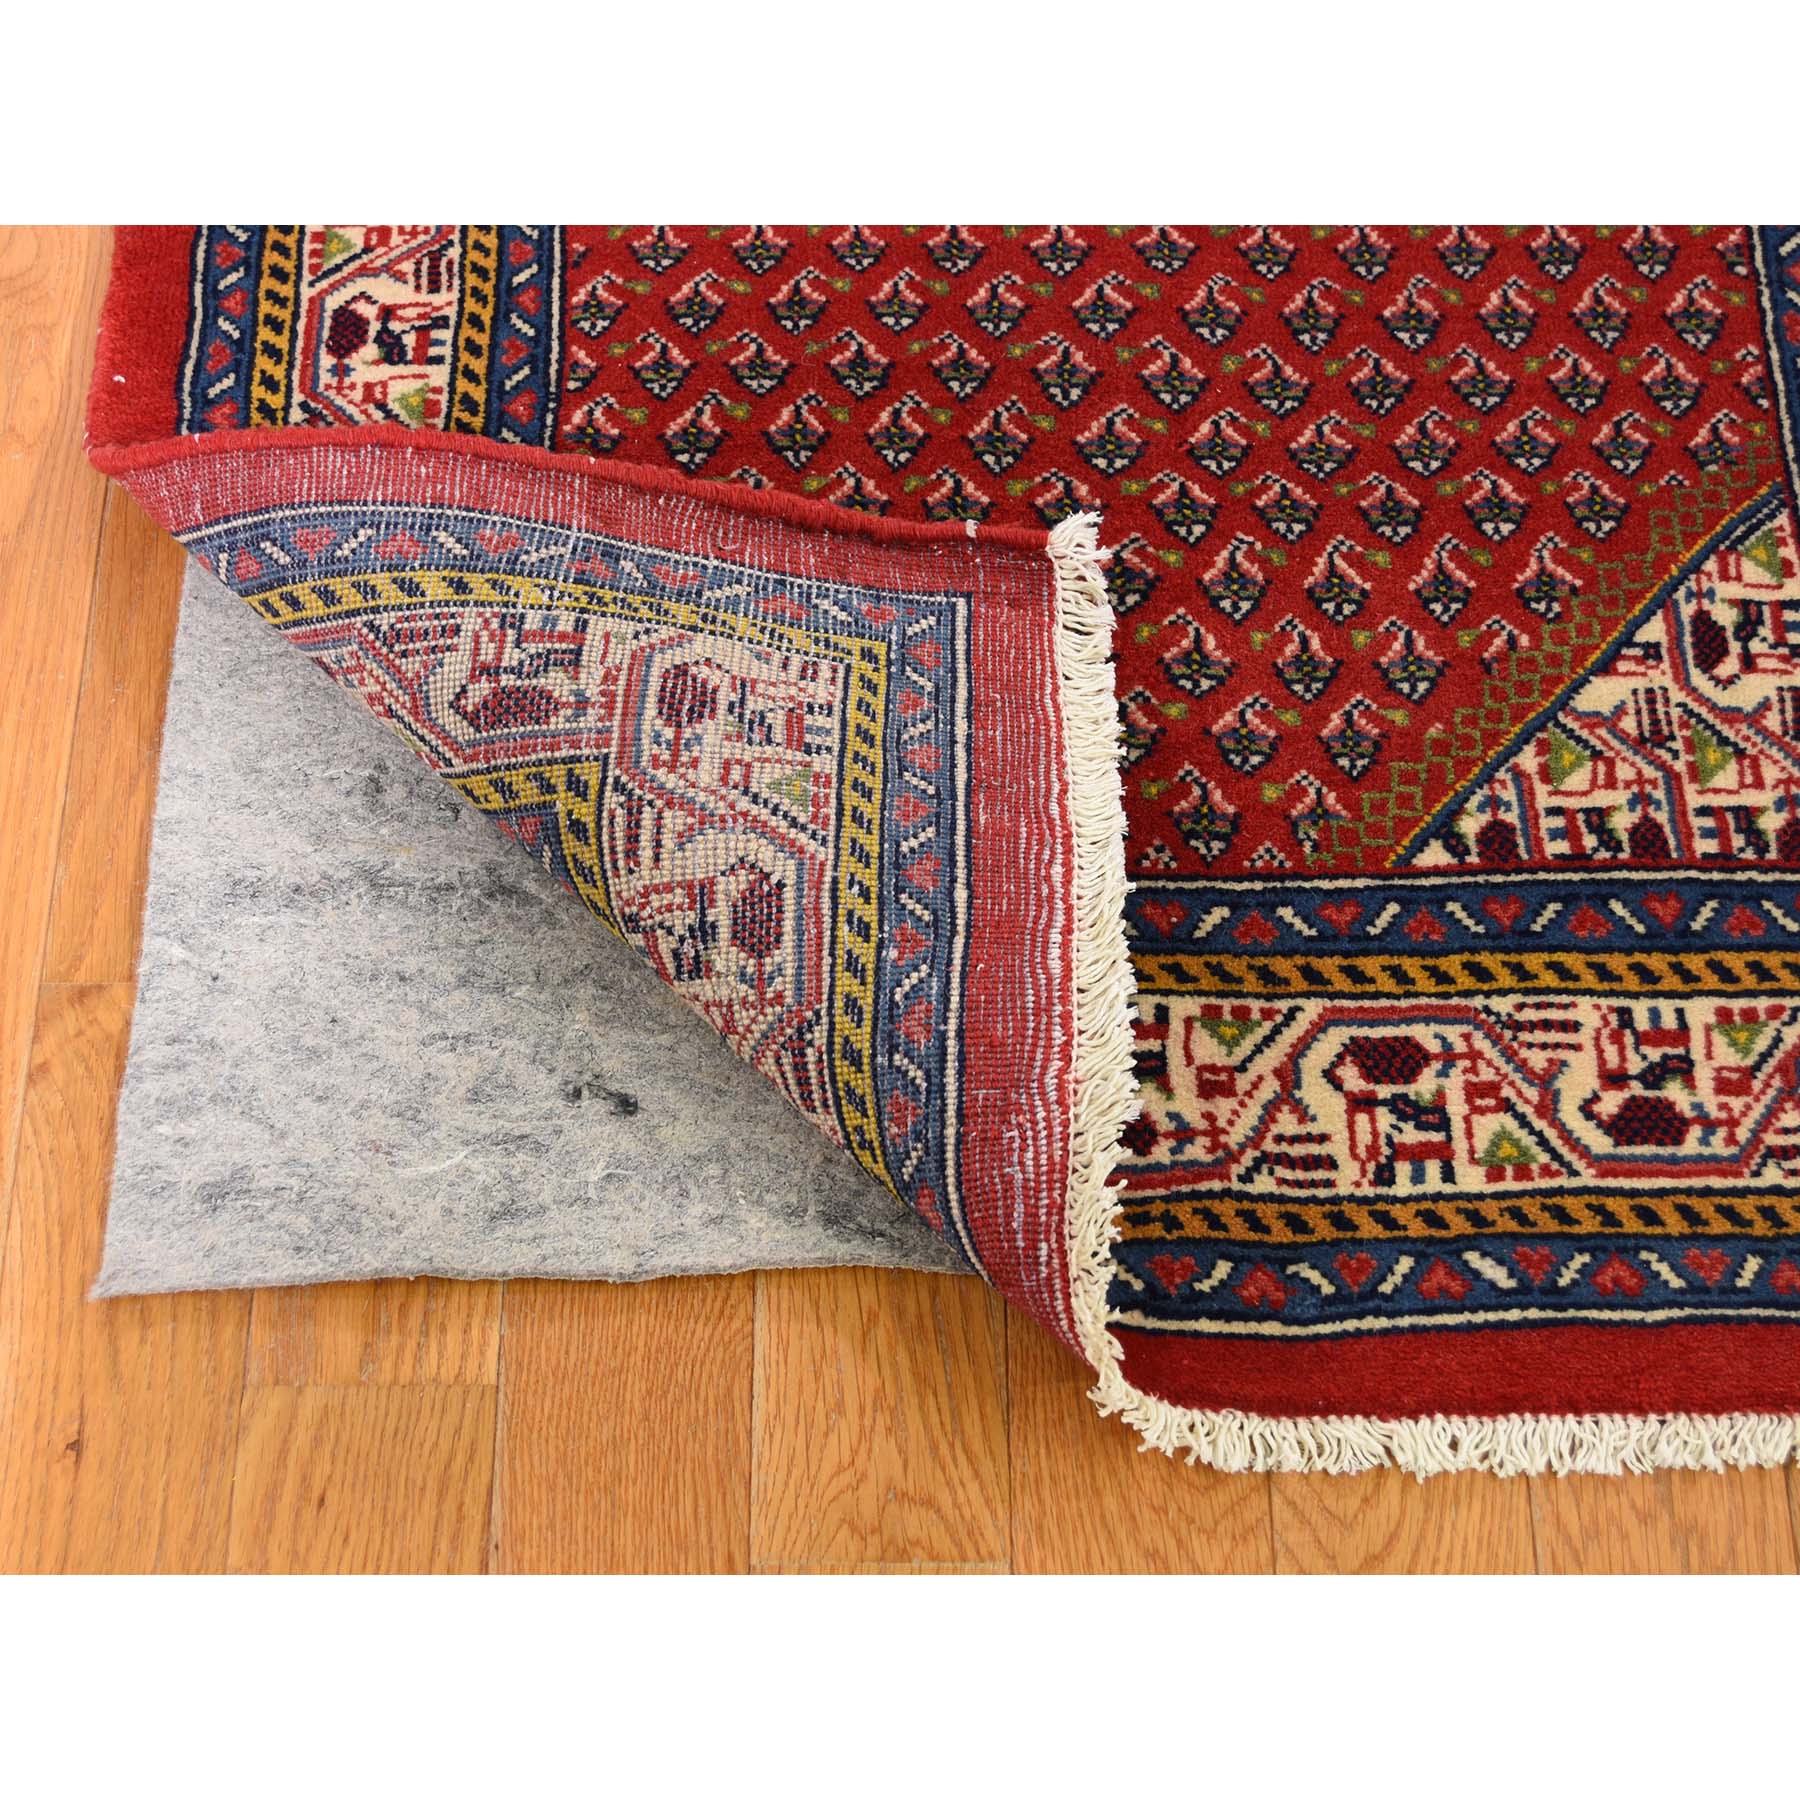 2-7 x10-2  Red New Persian Seraband Runner Pure Wool Hand-Knotted Oriental Rug 